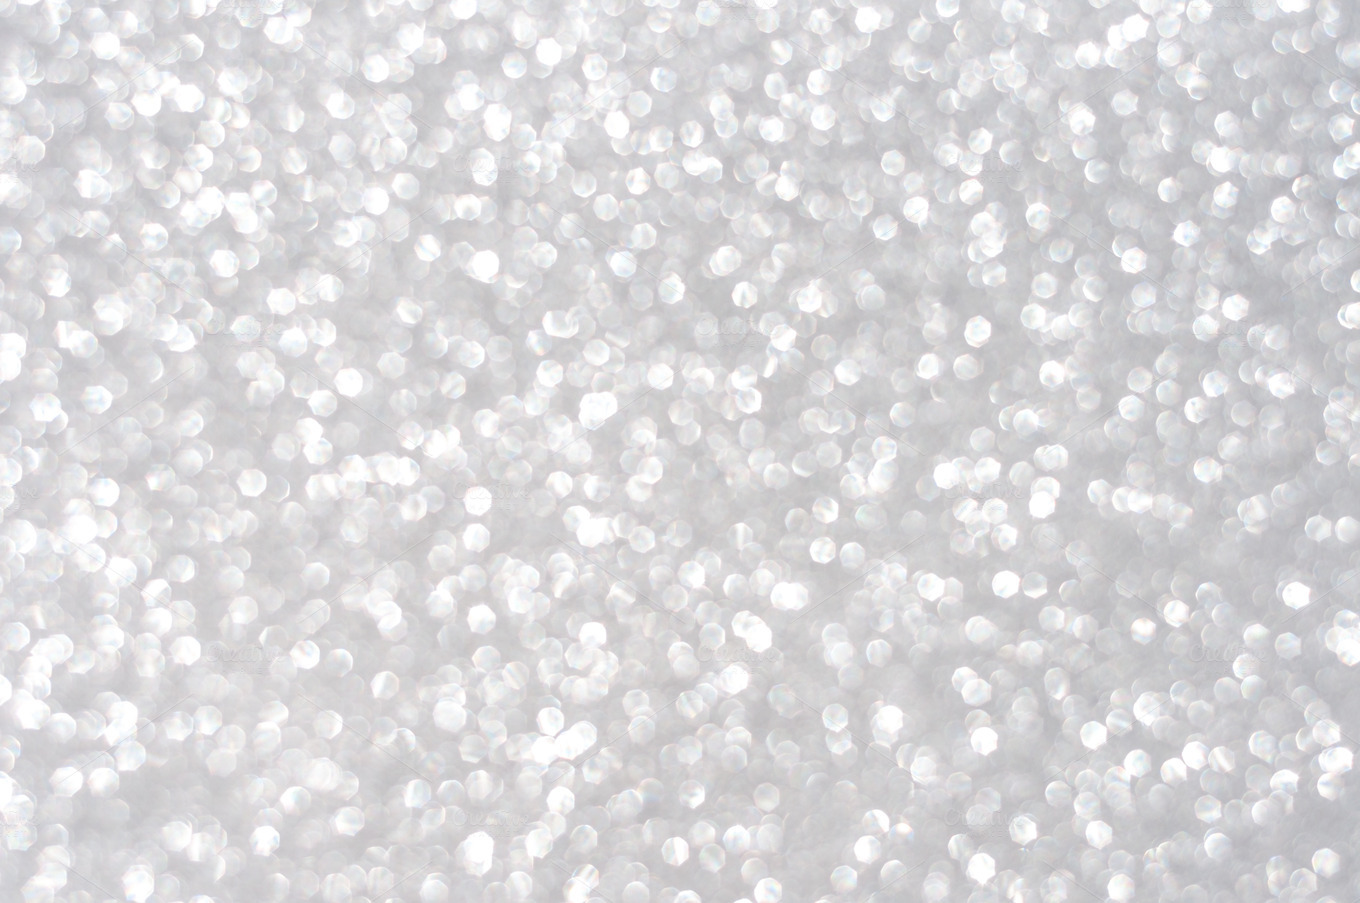 sparkly backgrounds for powerpoint